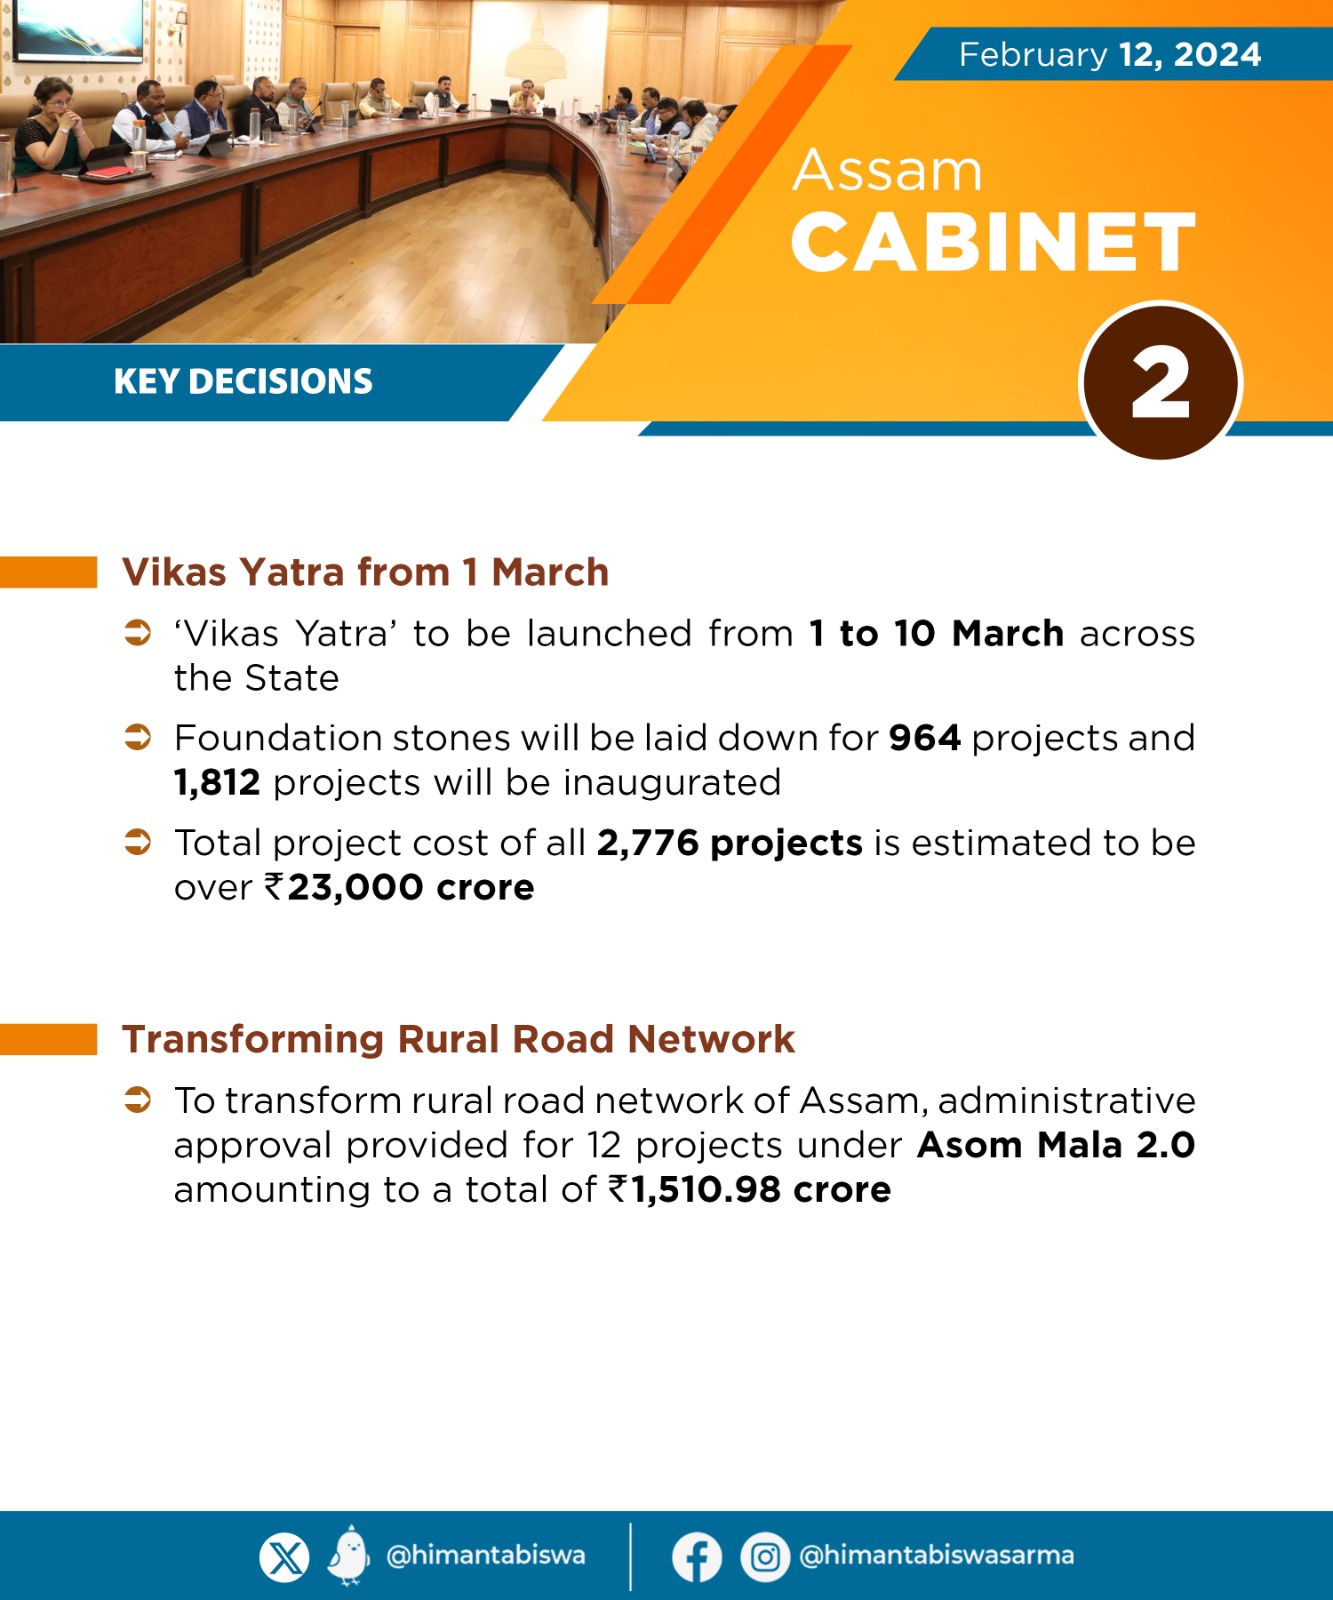 Cabinet decision on 12 February, 2024 (2)